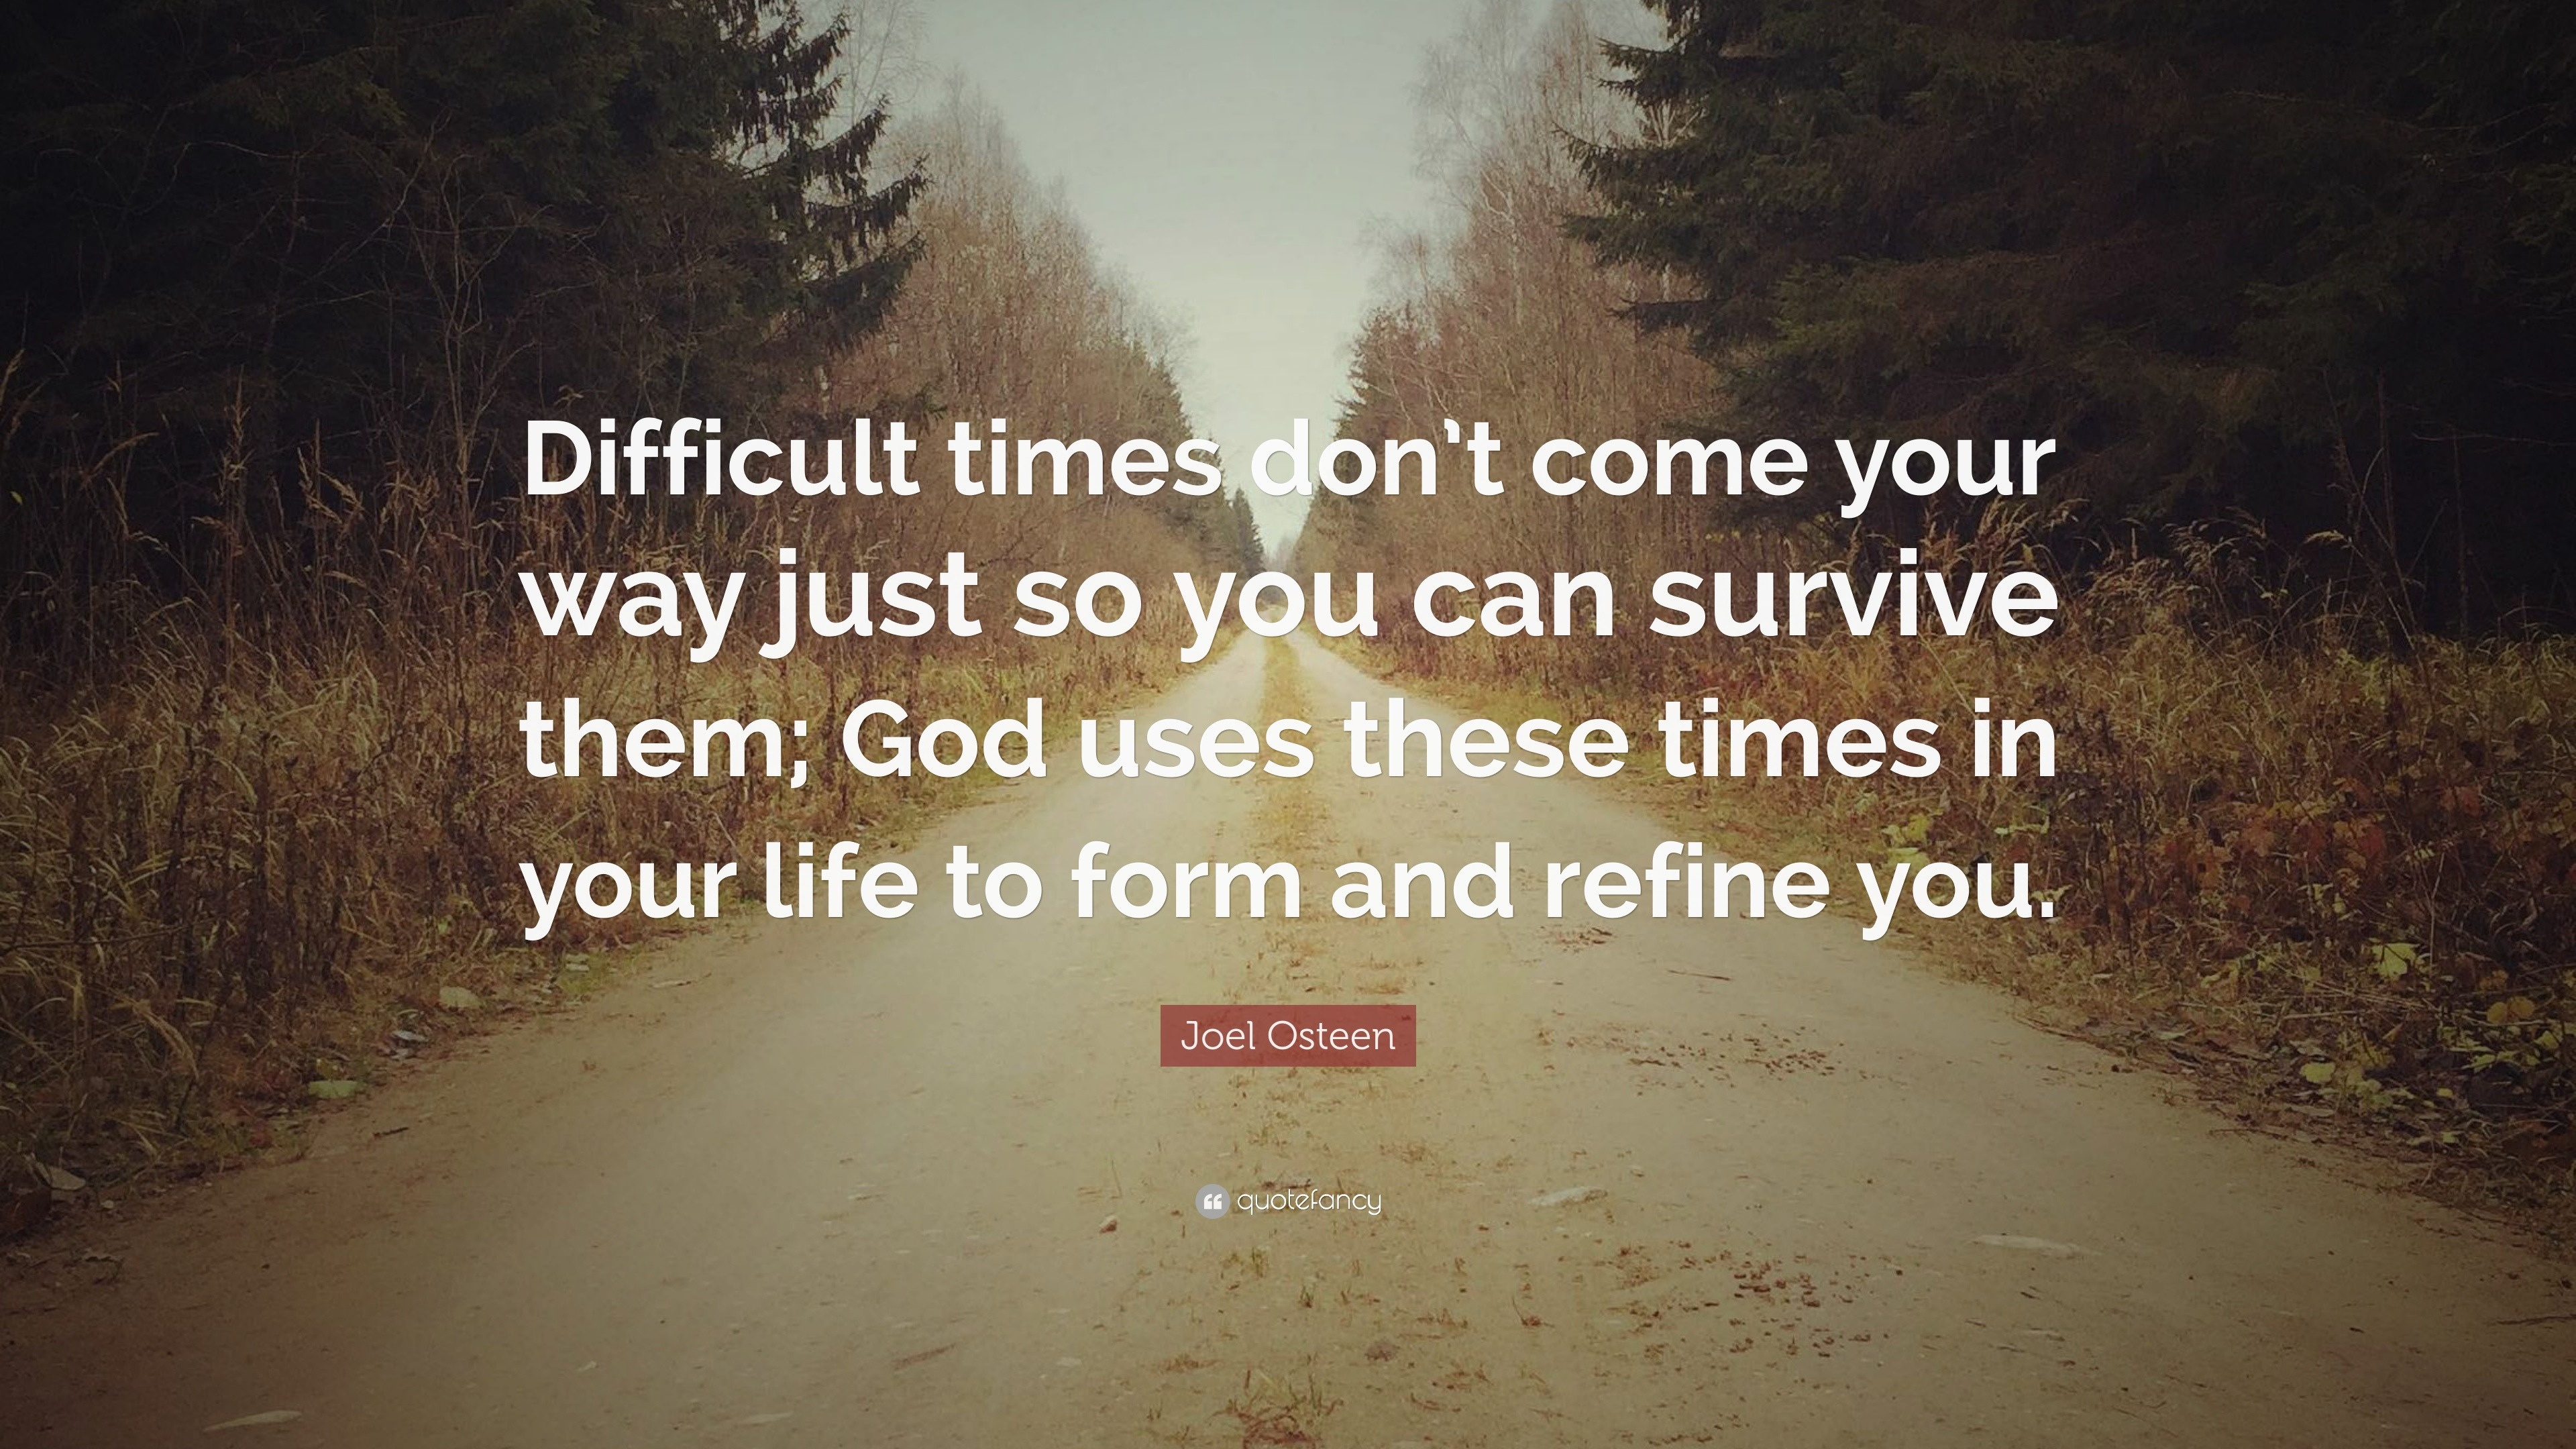 Joel Osteen Quote “Difficult times don t e your way just so you